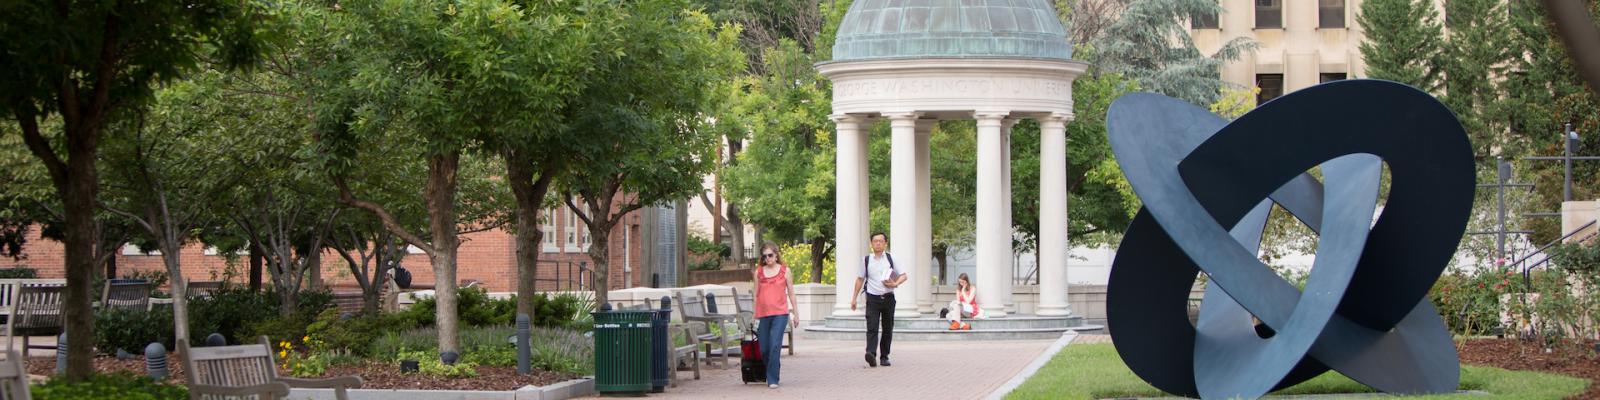 Two students walk through Kogan Plaza with the GW Tempietto in the background